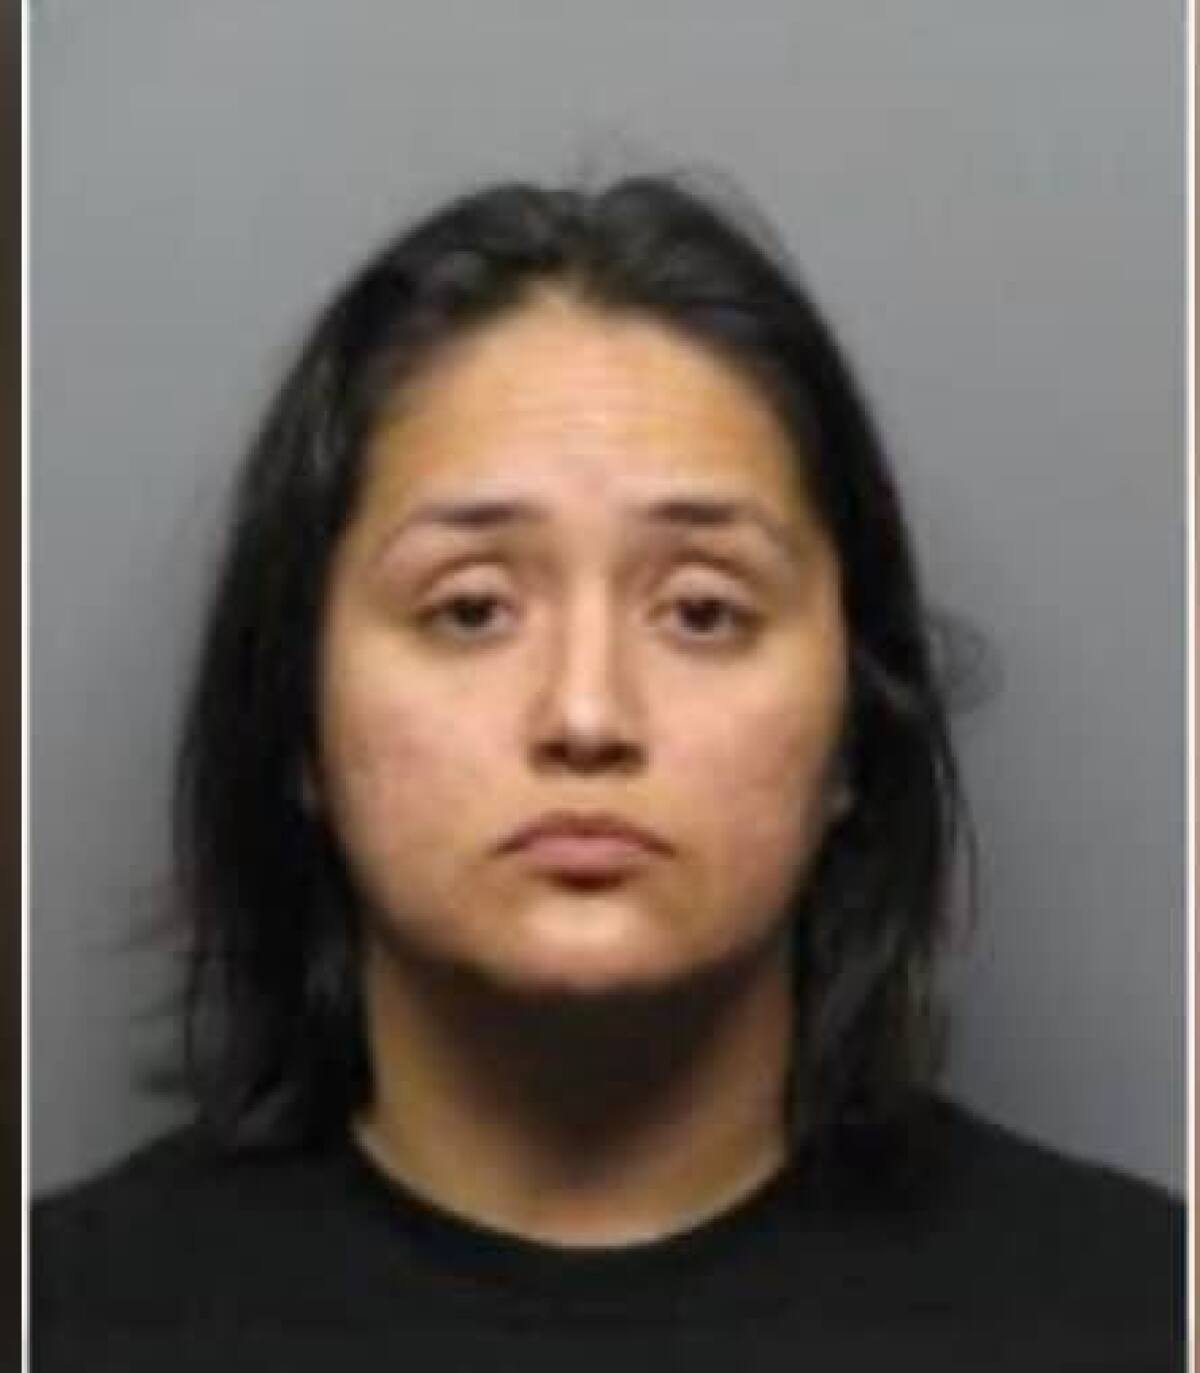 Police are searching for 28-year-old Ruby Delgadillo after authorities say she rammed her car into a barber in a dispute over a haircut.